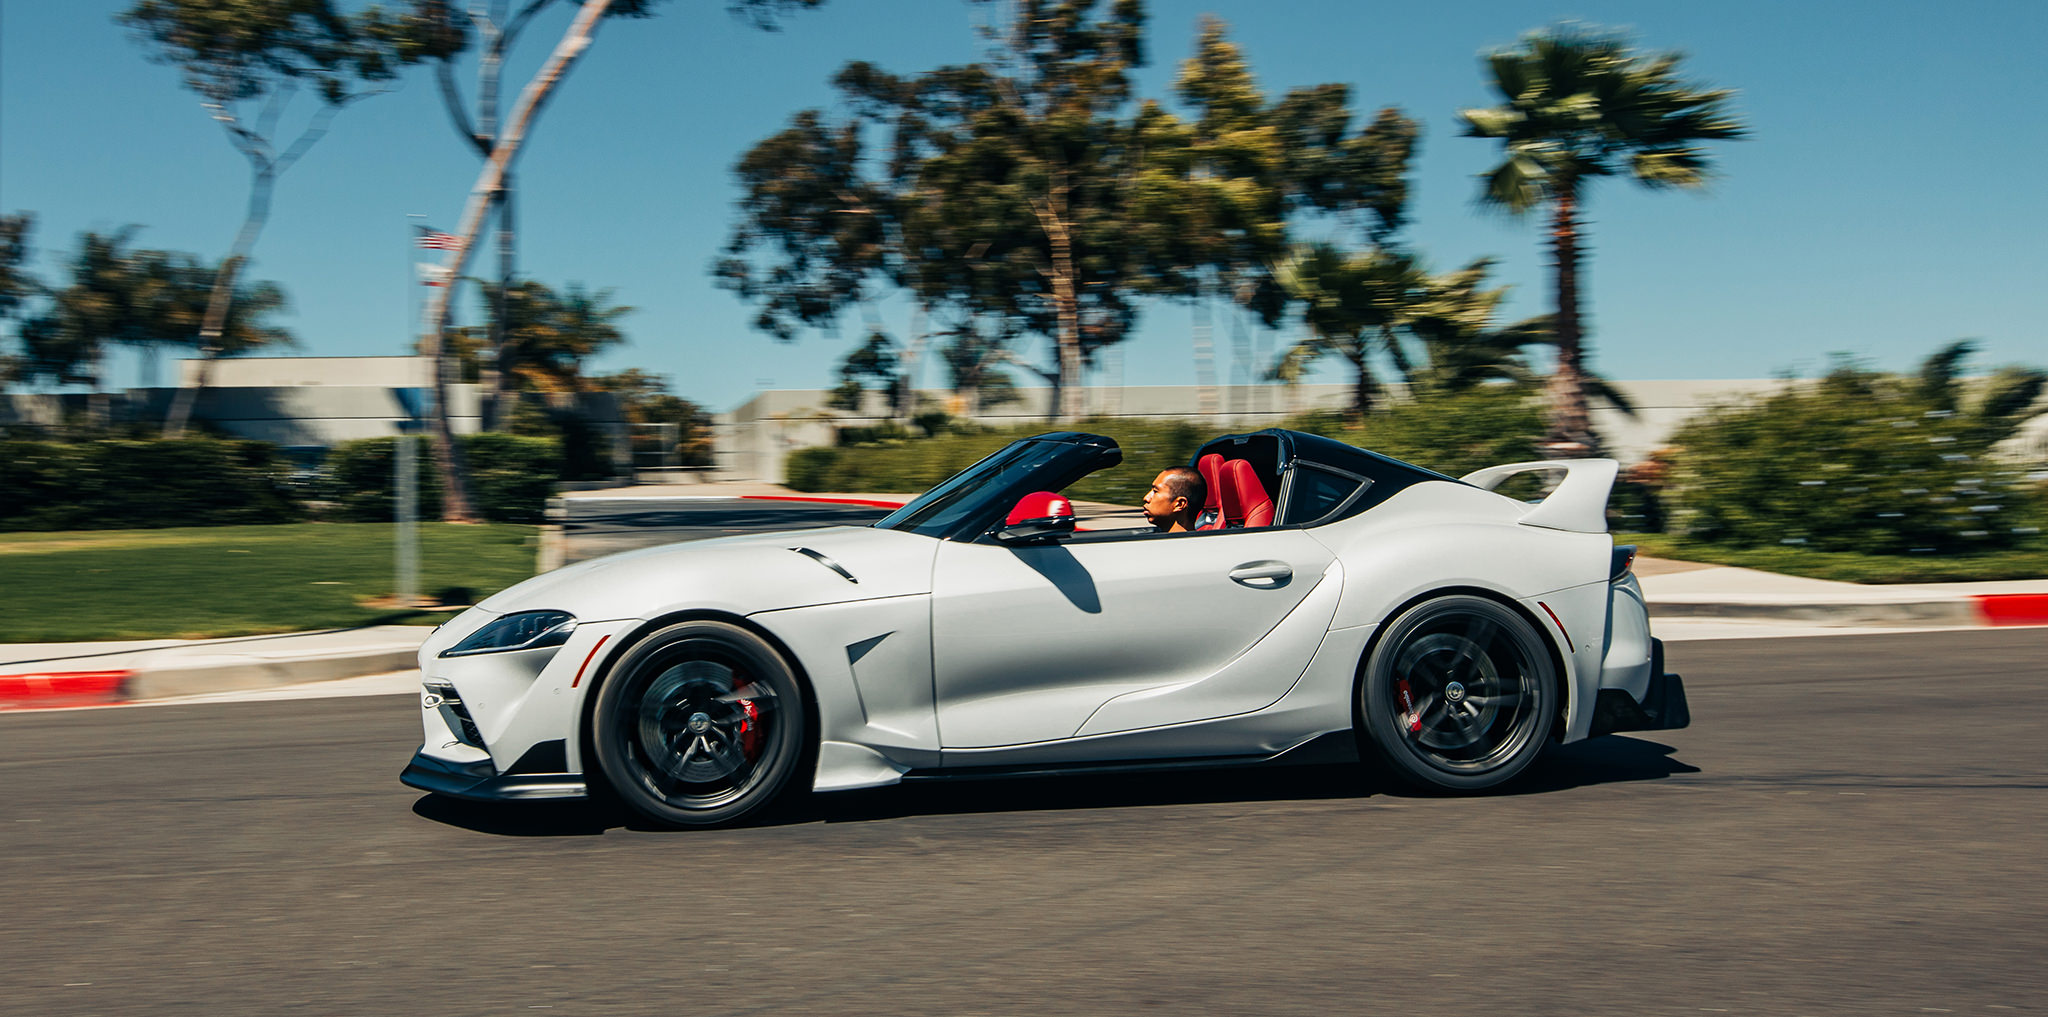 A Targa Top Toyota GR Supra Does Exist, and We Take a Closer Look